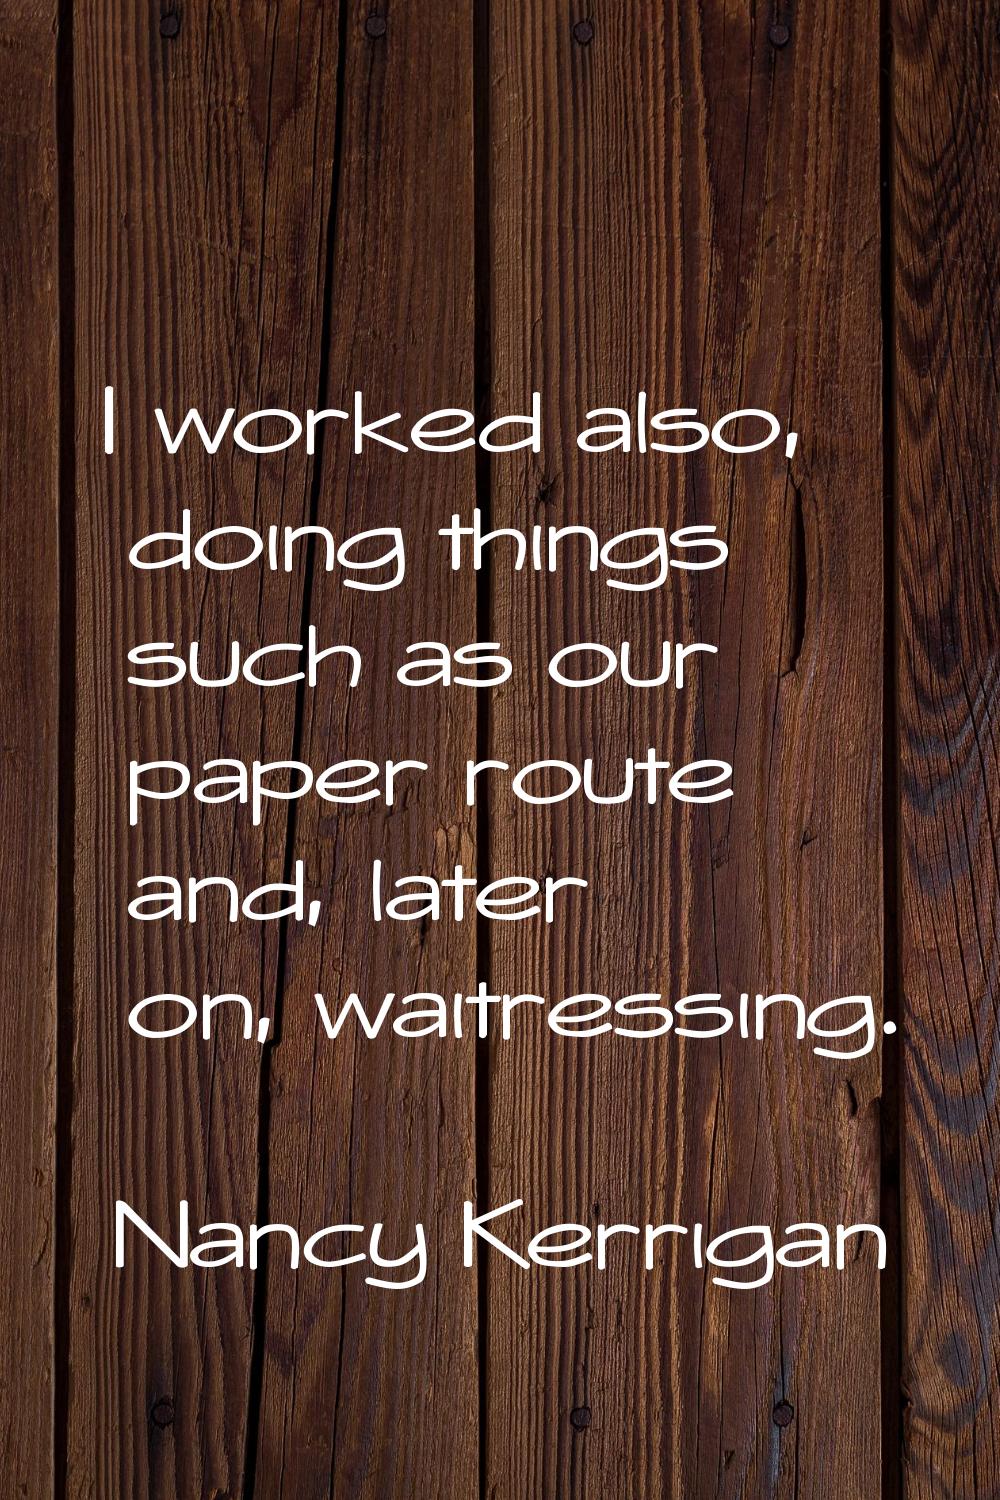 I worked also, doing things such as our paper route and, later on, waitressing.